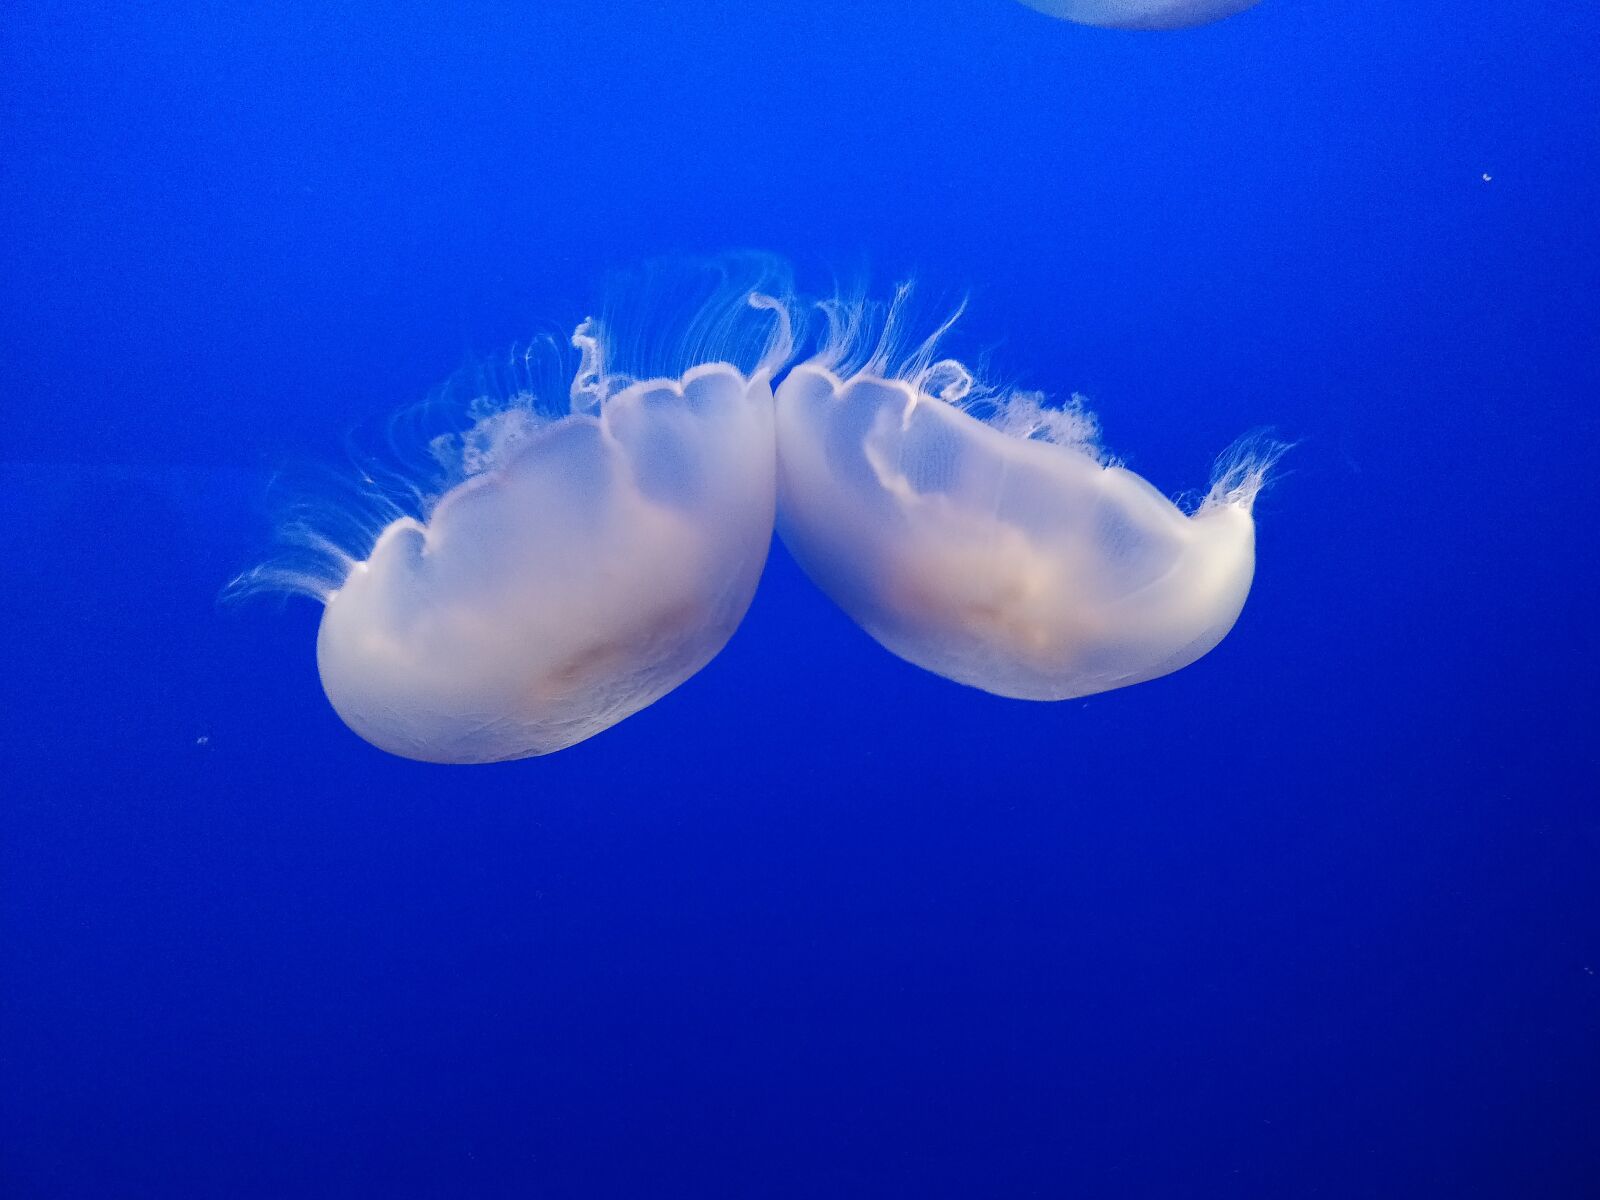 OnePlus A5000 sample photo. Jellyfish, pair, couple photography